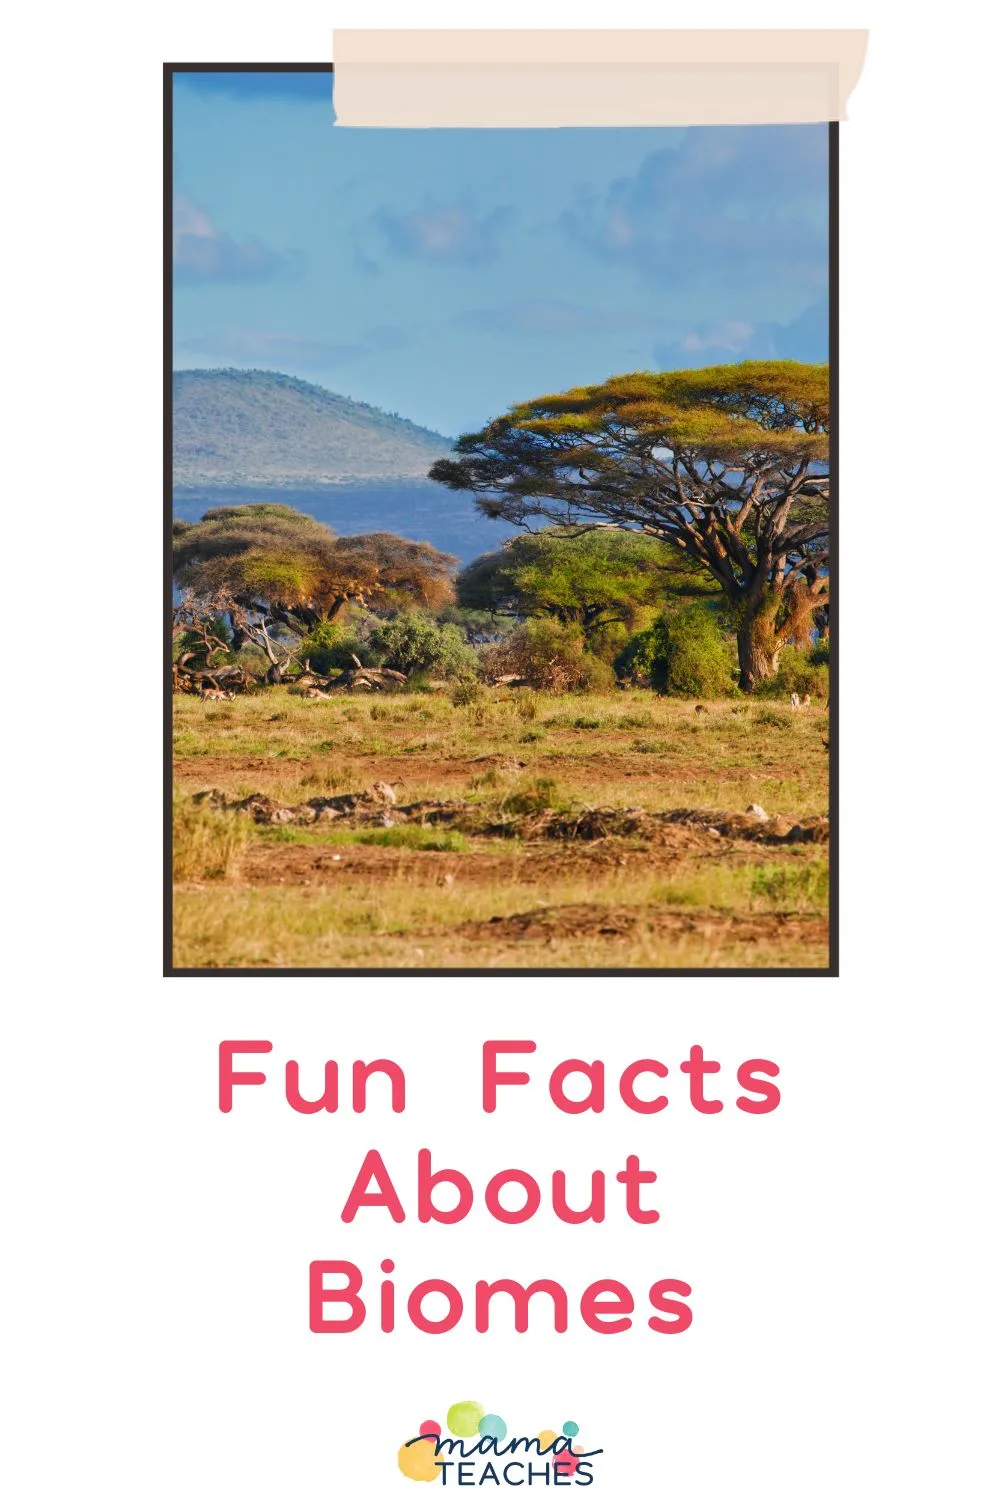 Fun Facts About Biomes